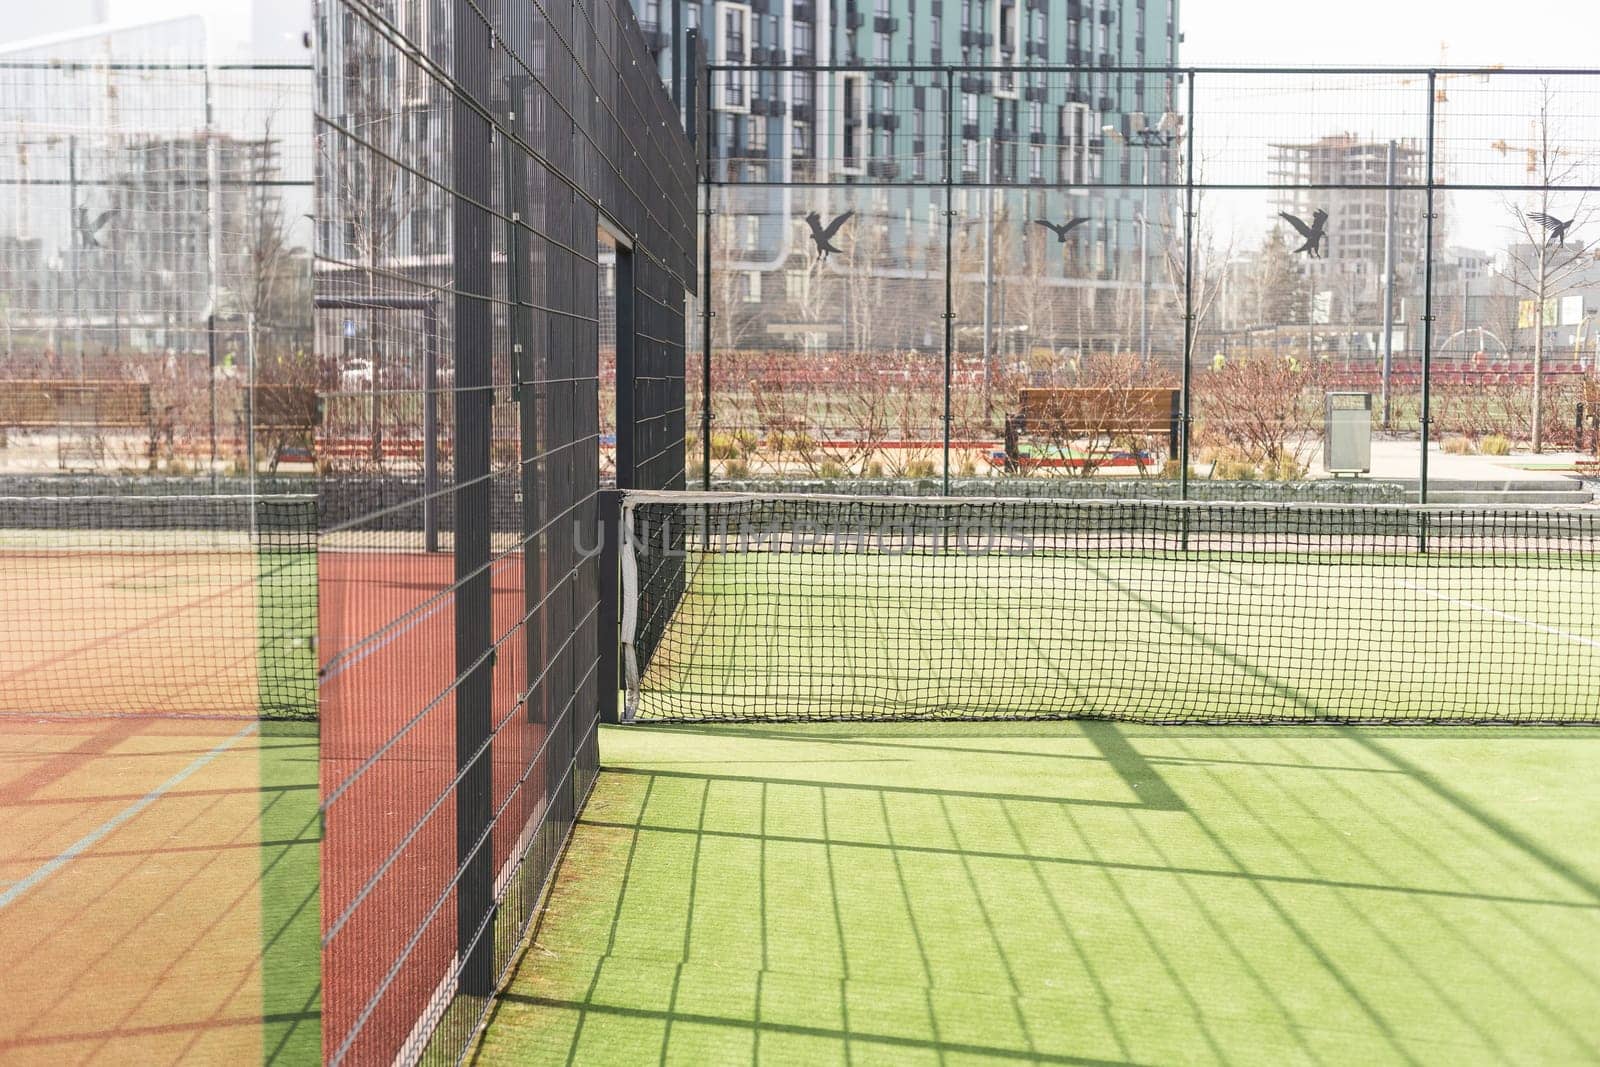 View of multi-functional sports area with tennis courts. High quality photo